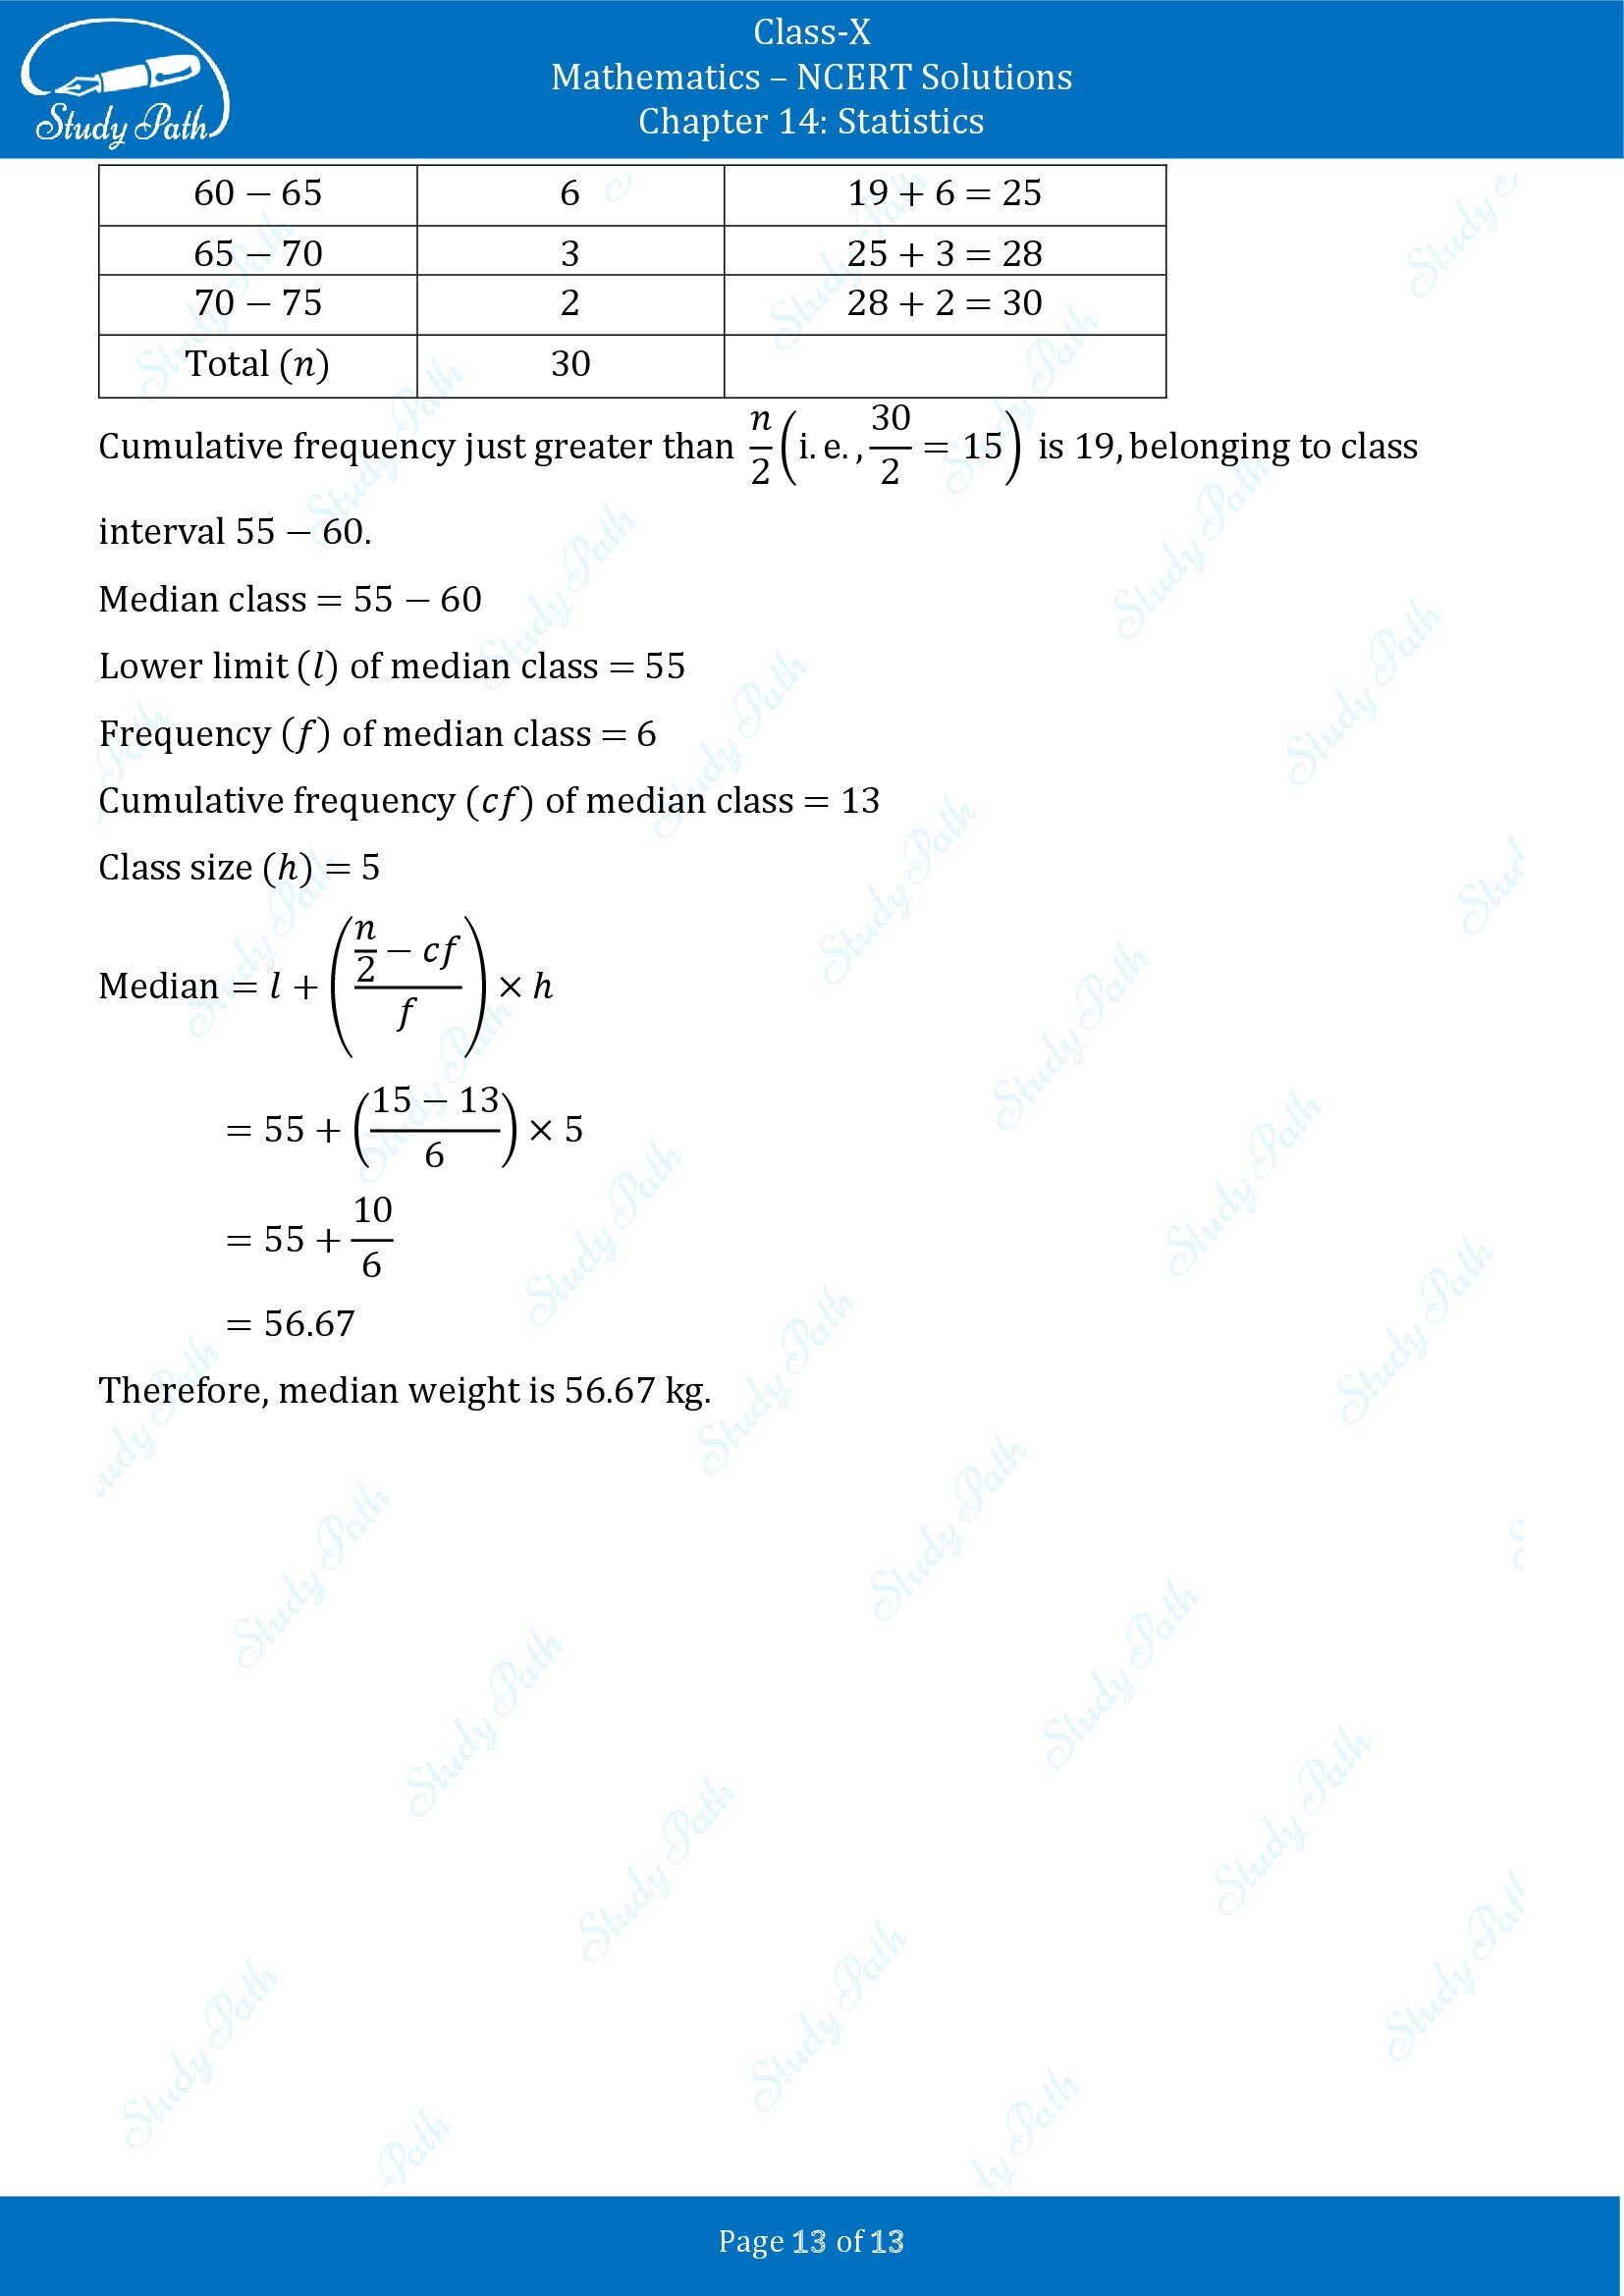 NCERT Solutions for Class 10 Maths Chapter 14 Statistics Exercise 14.3 00013